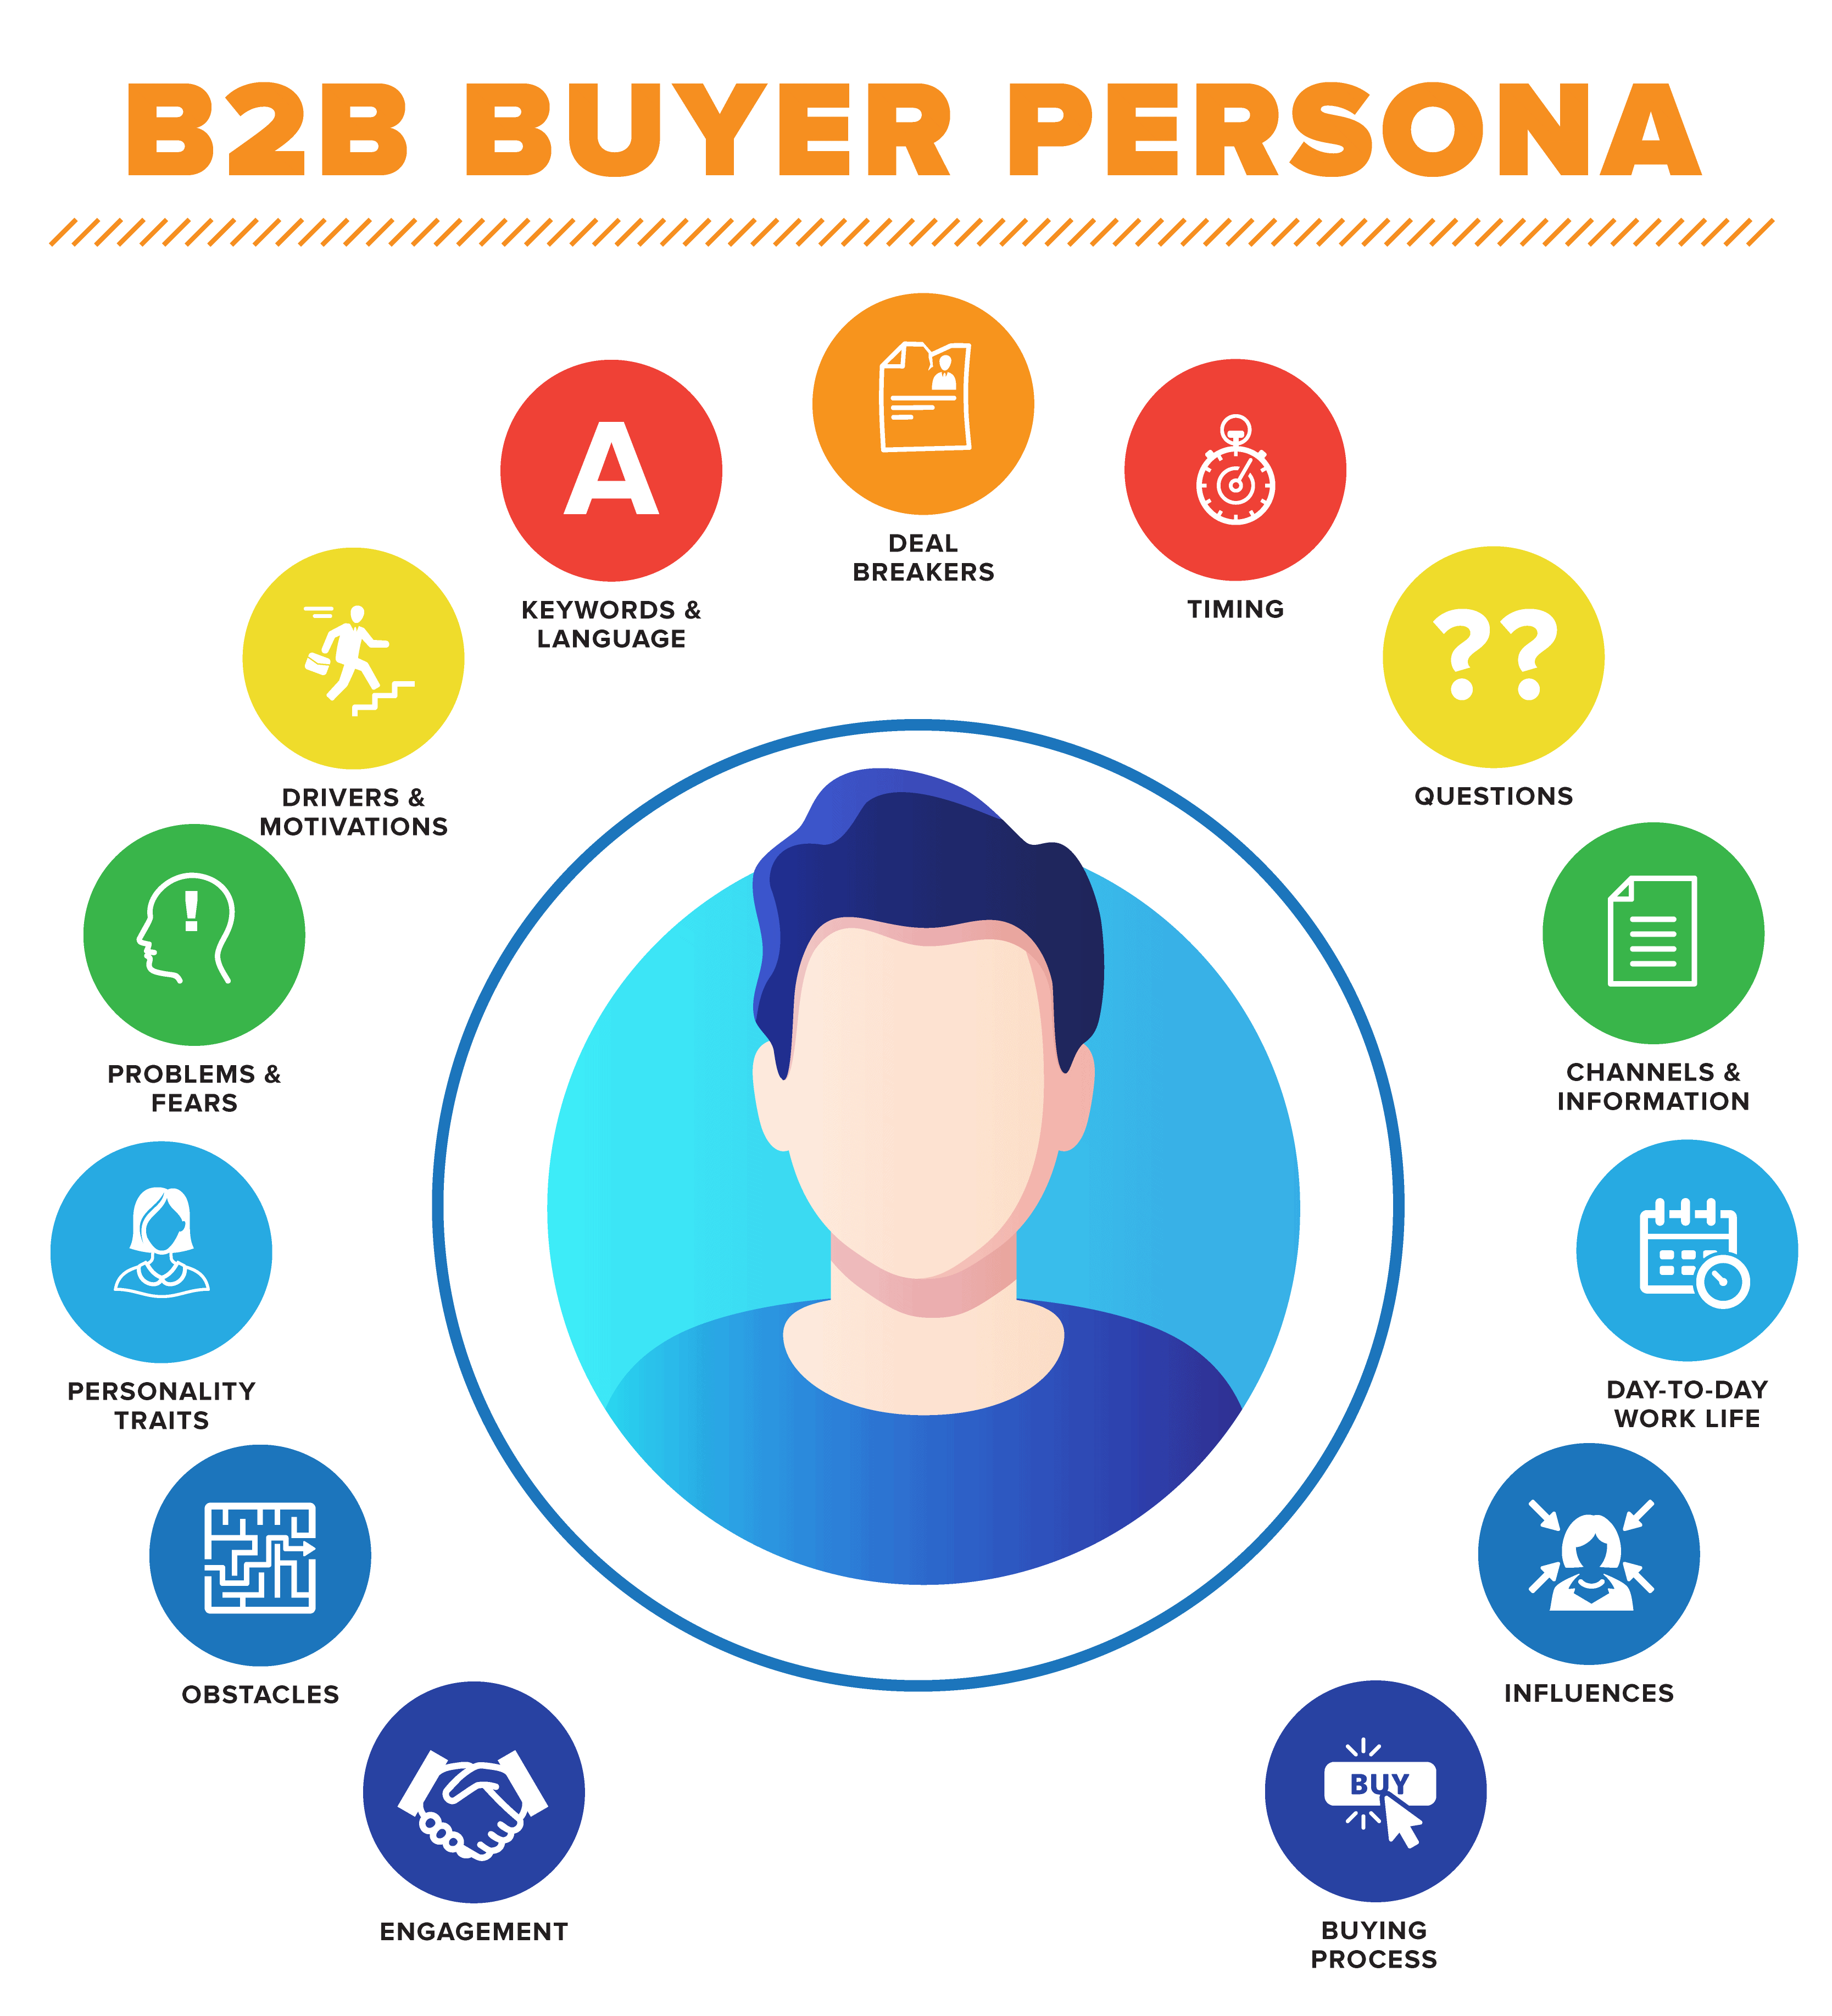 B2B Buyer Persona Infographic describing understanding your persona and their deal breakers, motives, personality etc.